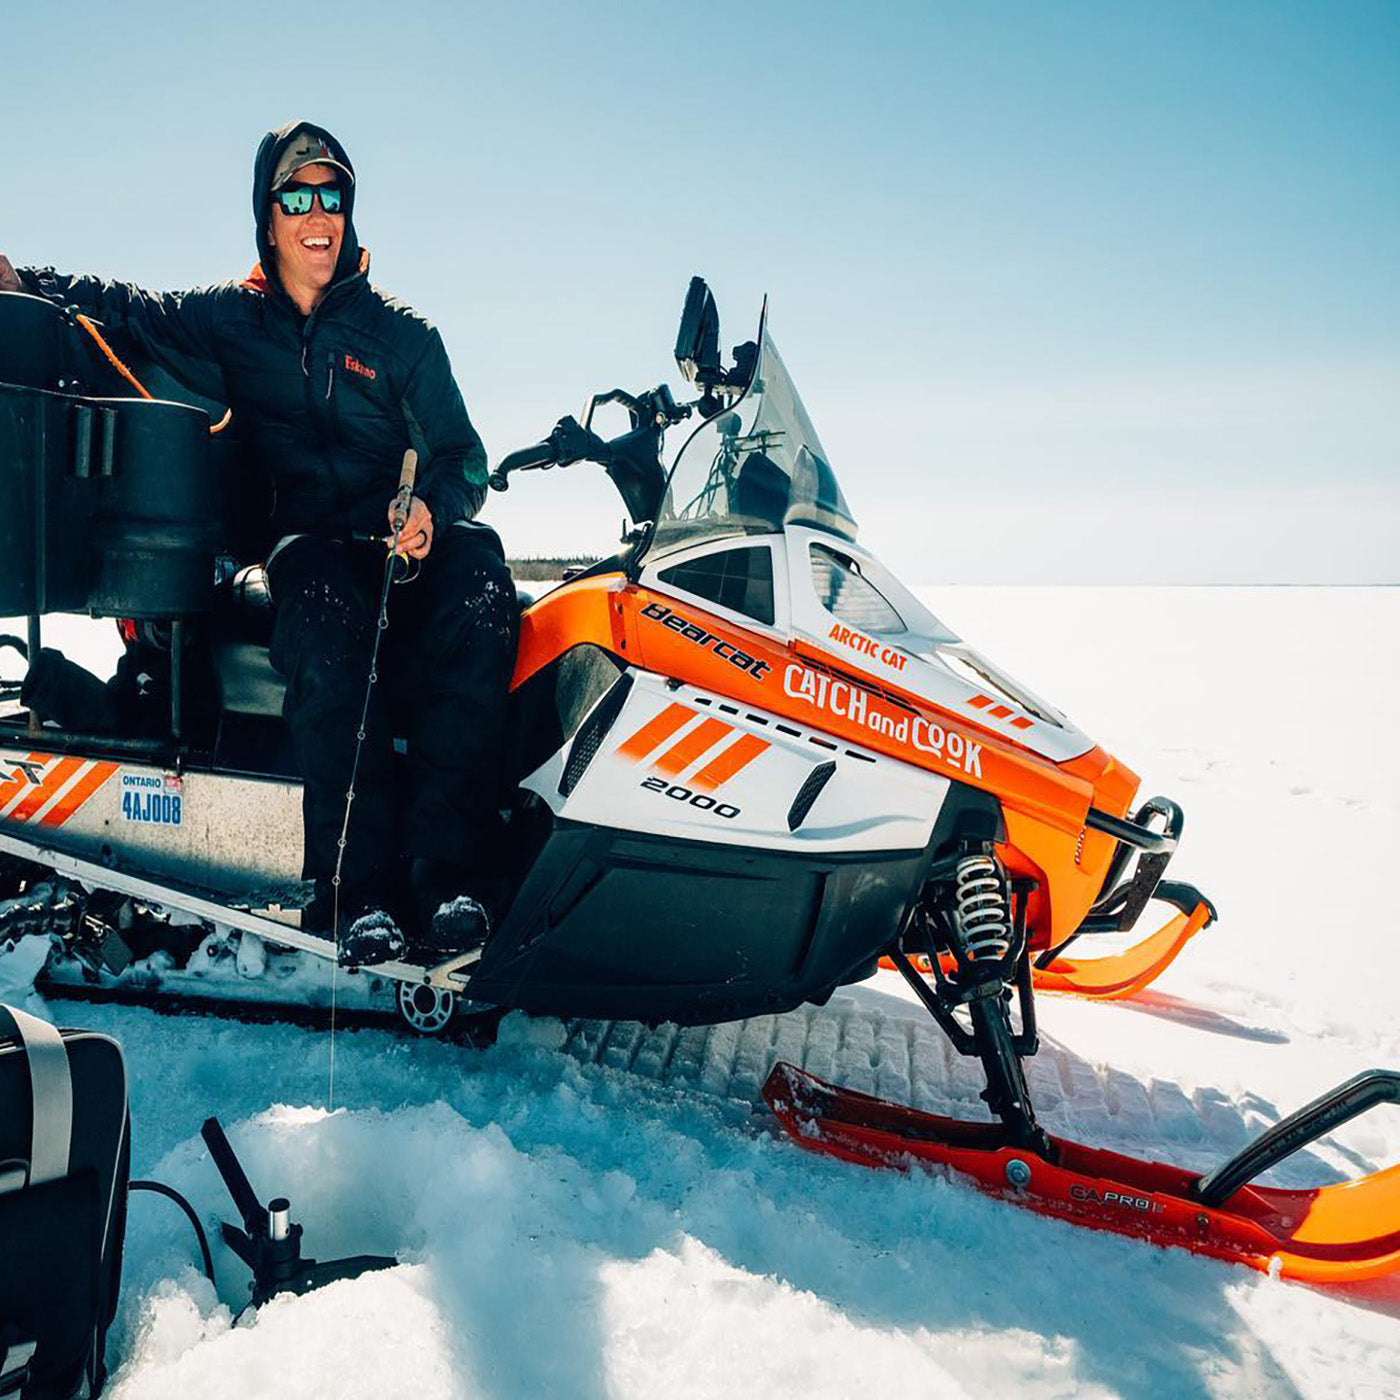 Influencer Jay Siemens sitting on snowmobile with orange C&A Pro skis